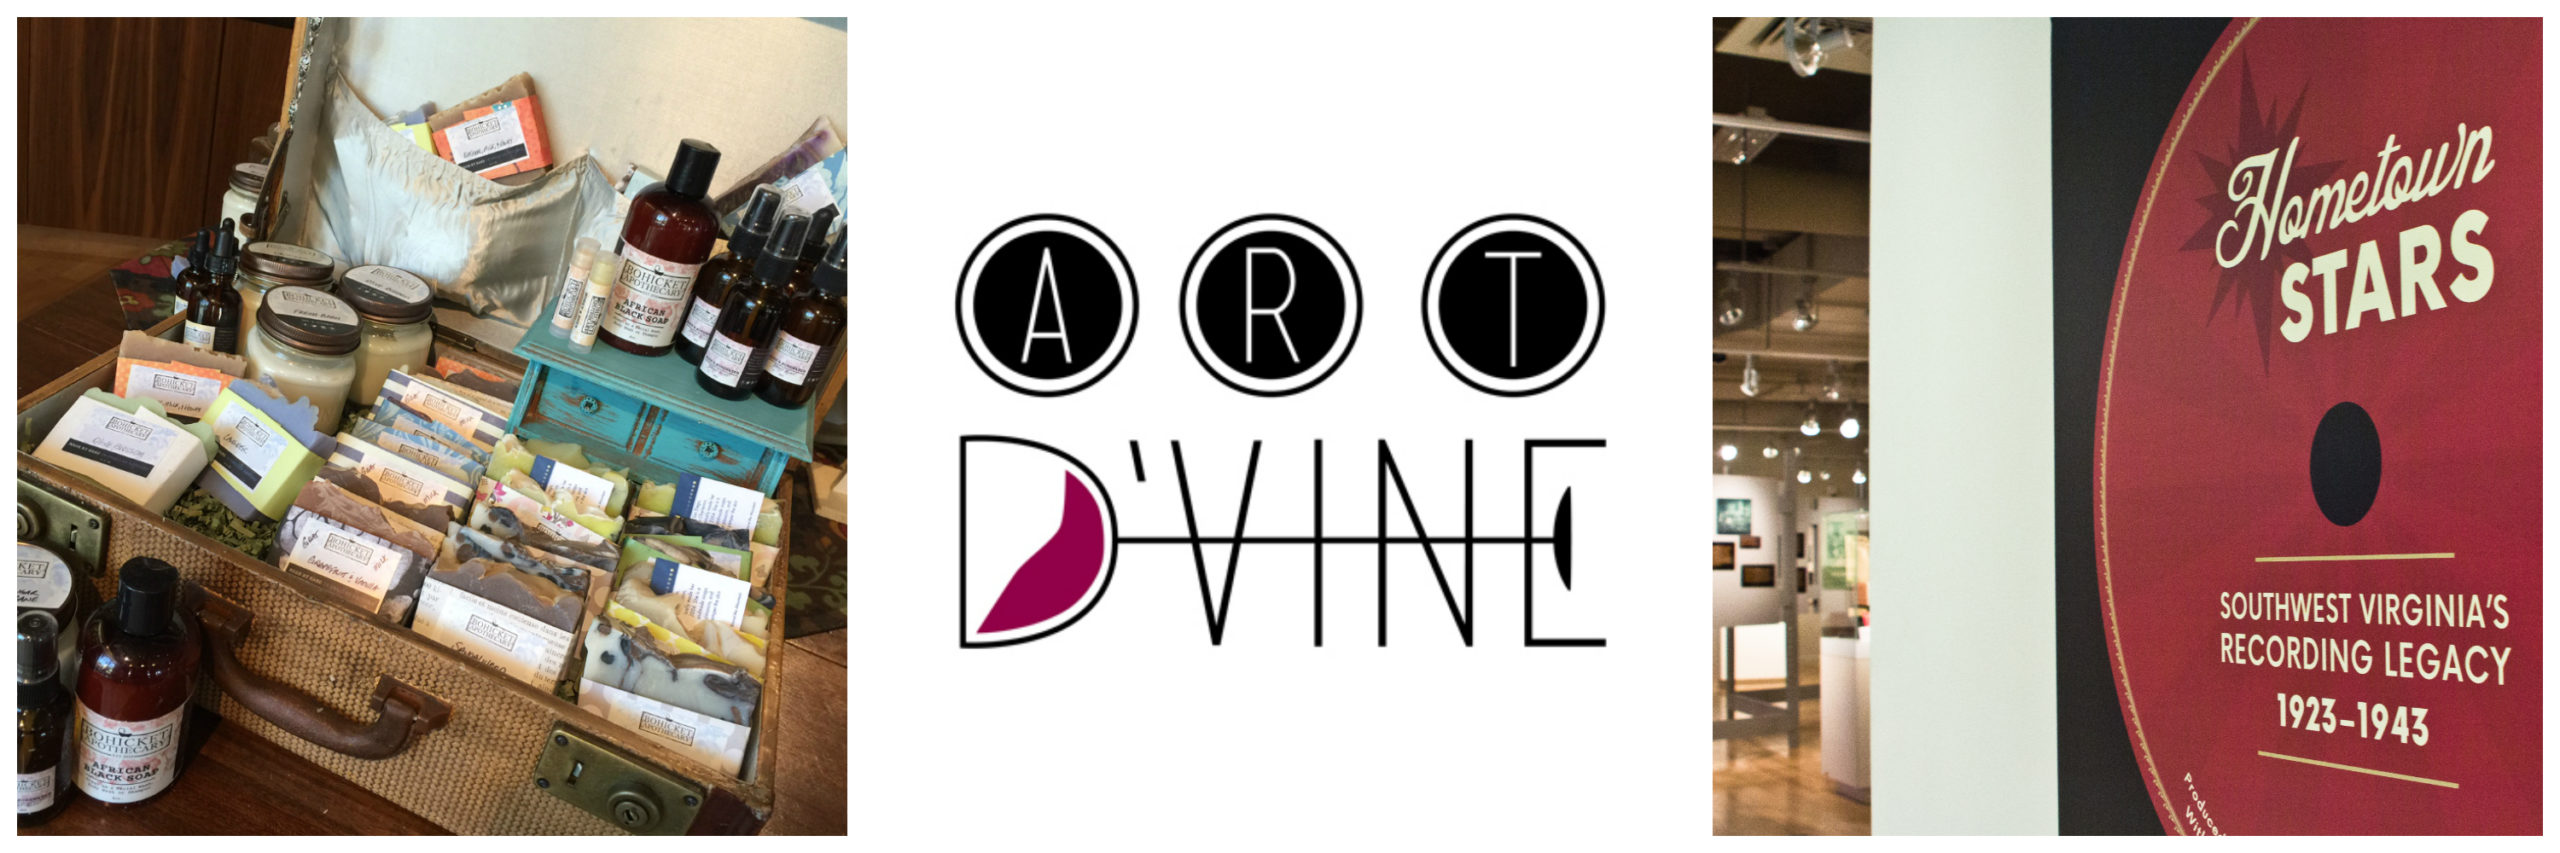 Museum to host Sullins Academy student art show, local artisan as part of Art D’Vine